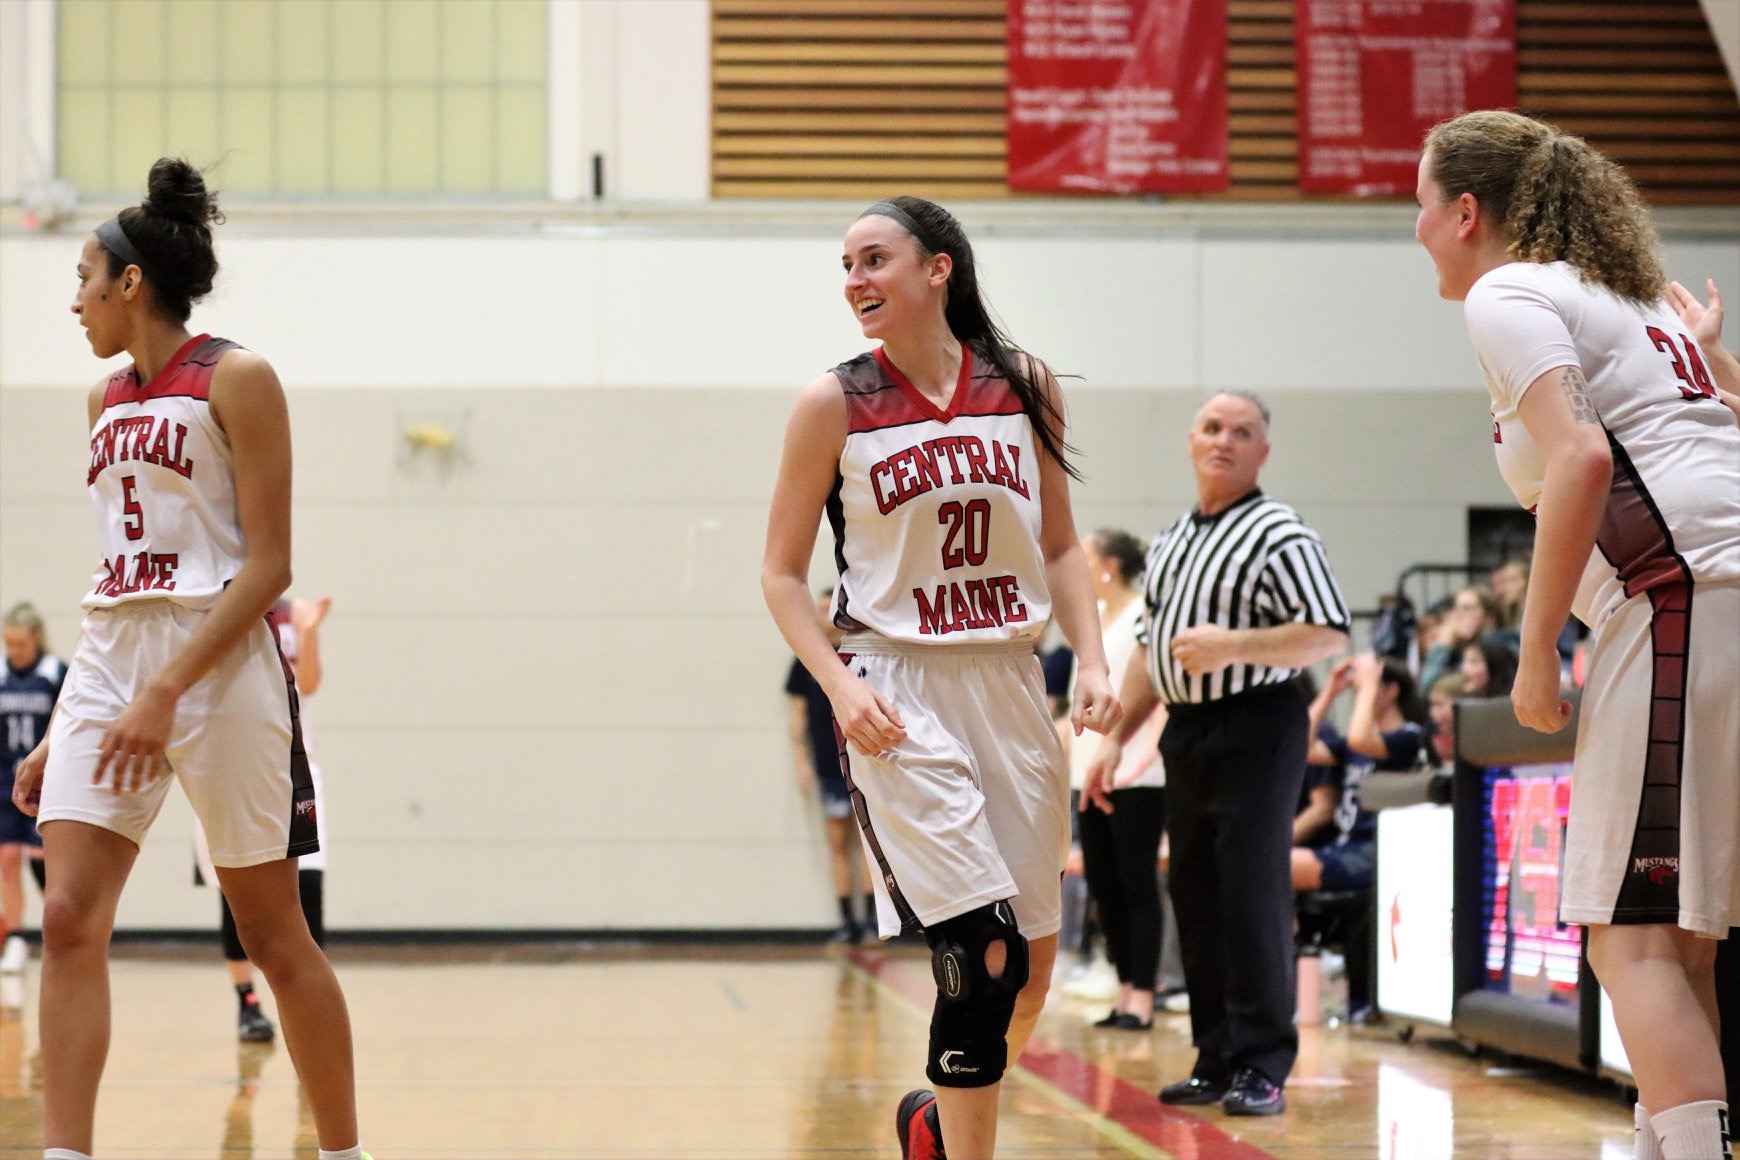 Women's Basketball advances to YSCC Semifinals with rout of Great Bay